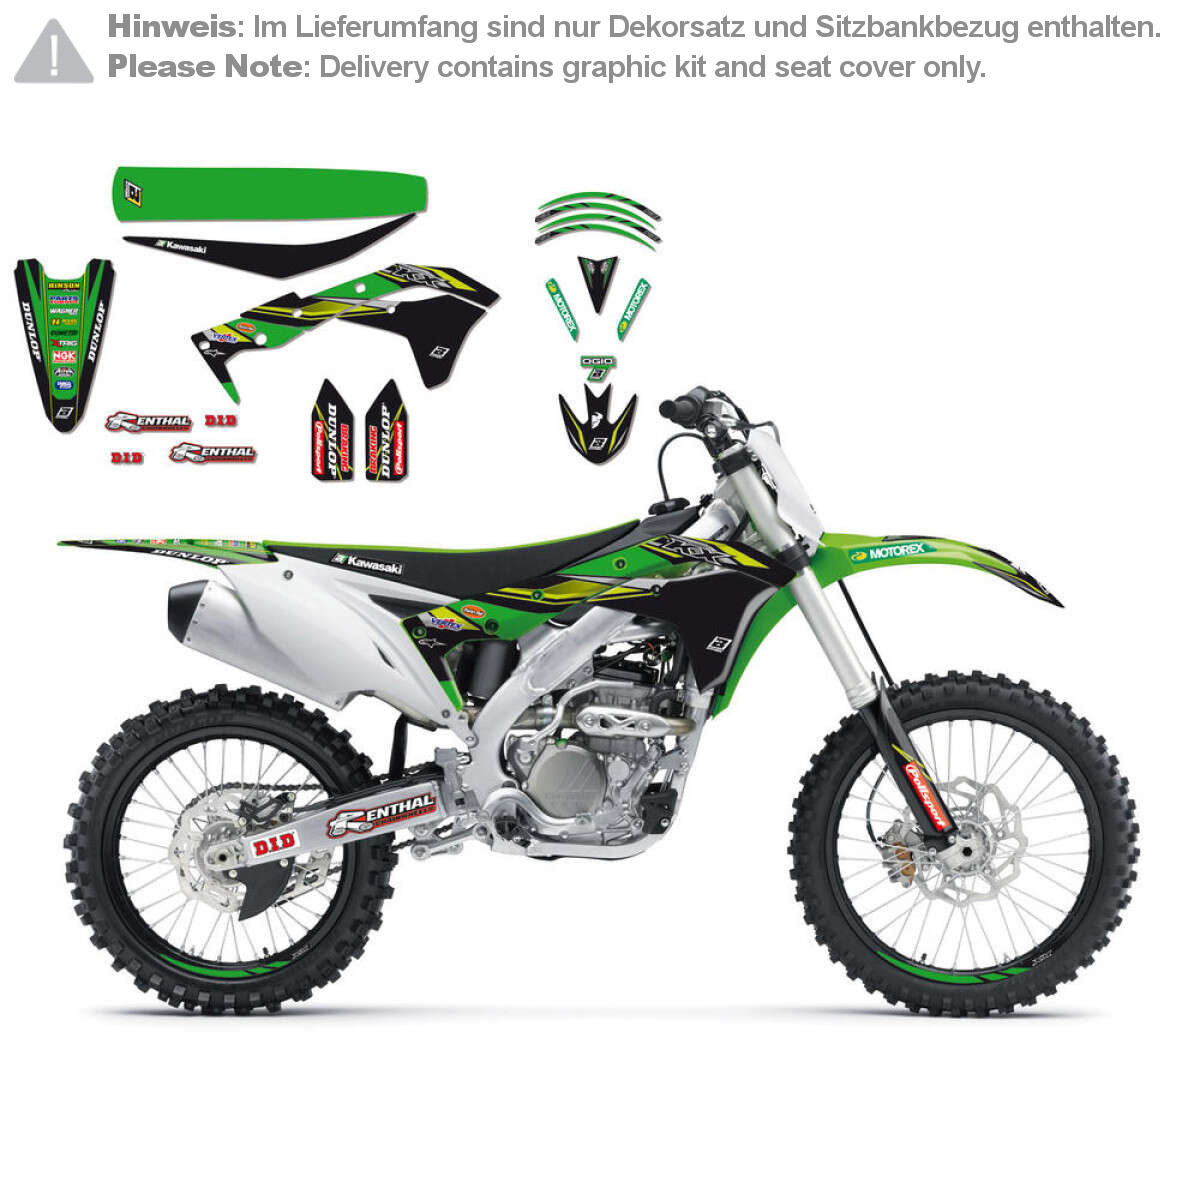 Blackbird Racing Graphic Kit with Seat Cover Replica Team Kawasaki KX-F 250 '17, Team Kawasaki Racing '17, Green/Black